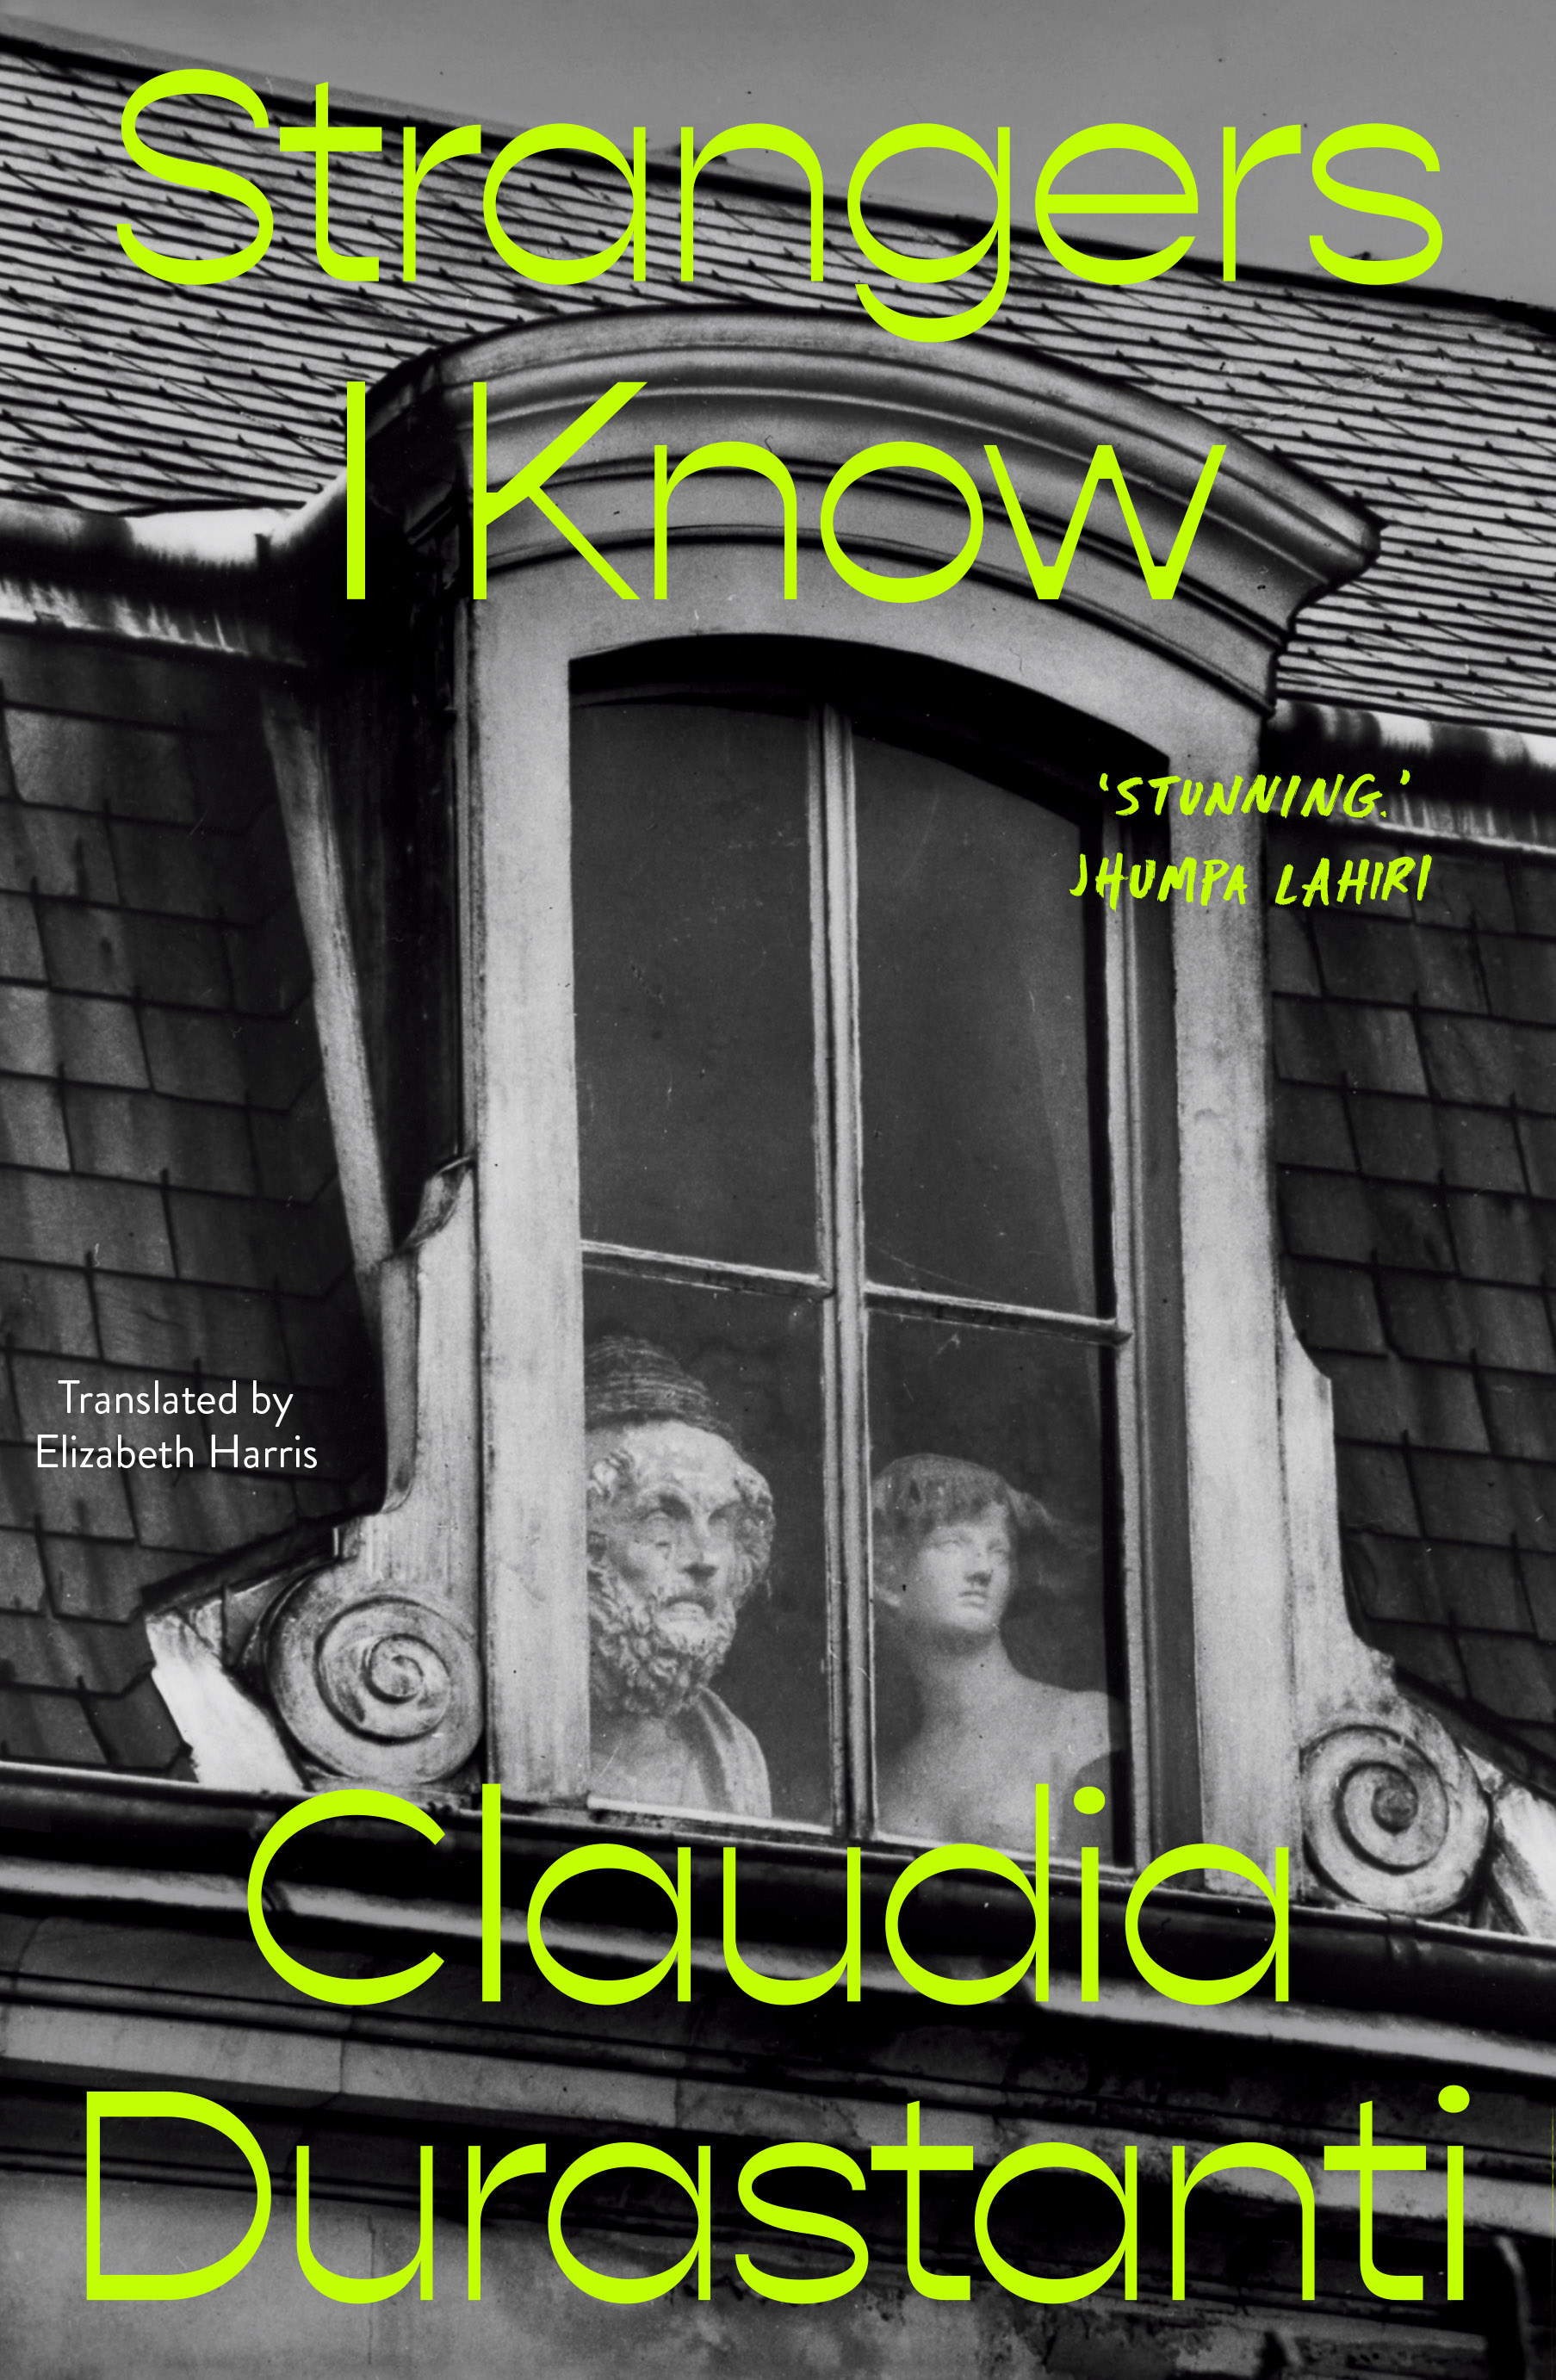 The book cover of Strangers I Know by Claudia Durastanti is a B&W image of two statues looking out of a dormer window